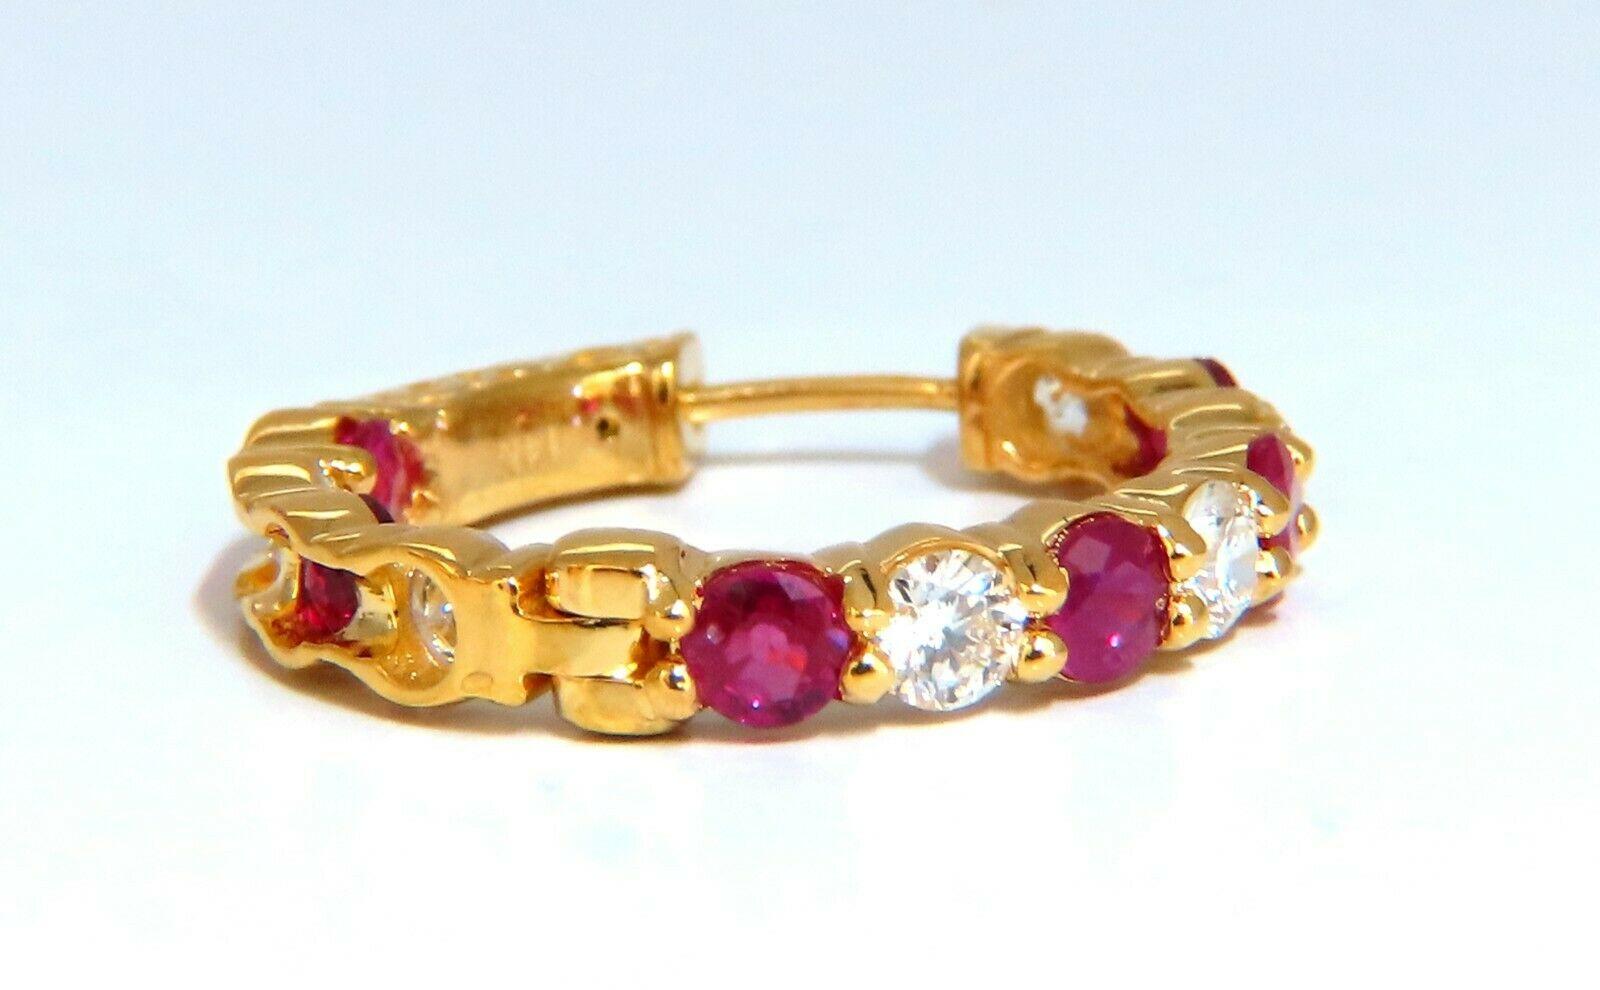 Inside/out  natural Ruby and Diamond hoop earrings.

2.50ct. round rubies, full brilliant cut clean clarity and transparent

1.64ct. natural round diamonds i color vs2 clarity.

14 karat yellow gold 7.3 g

23 mm wide (front to back)

3.6 mm wide at